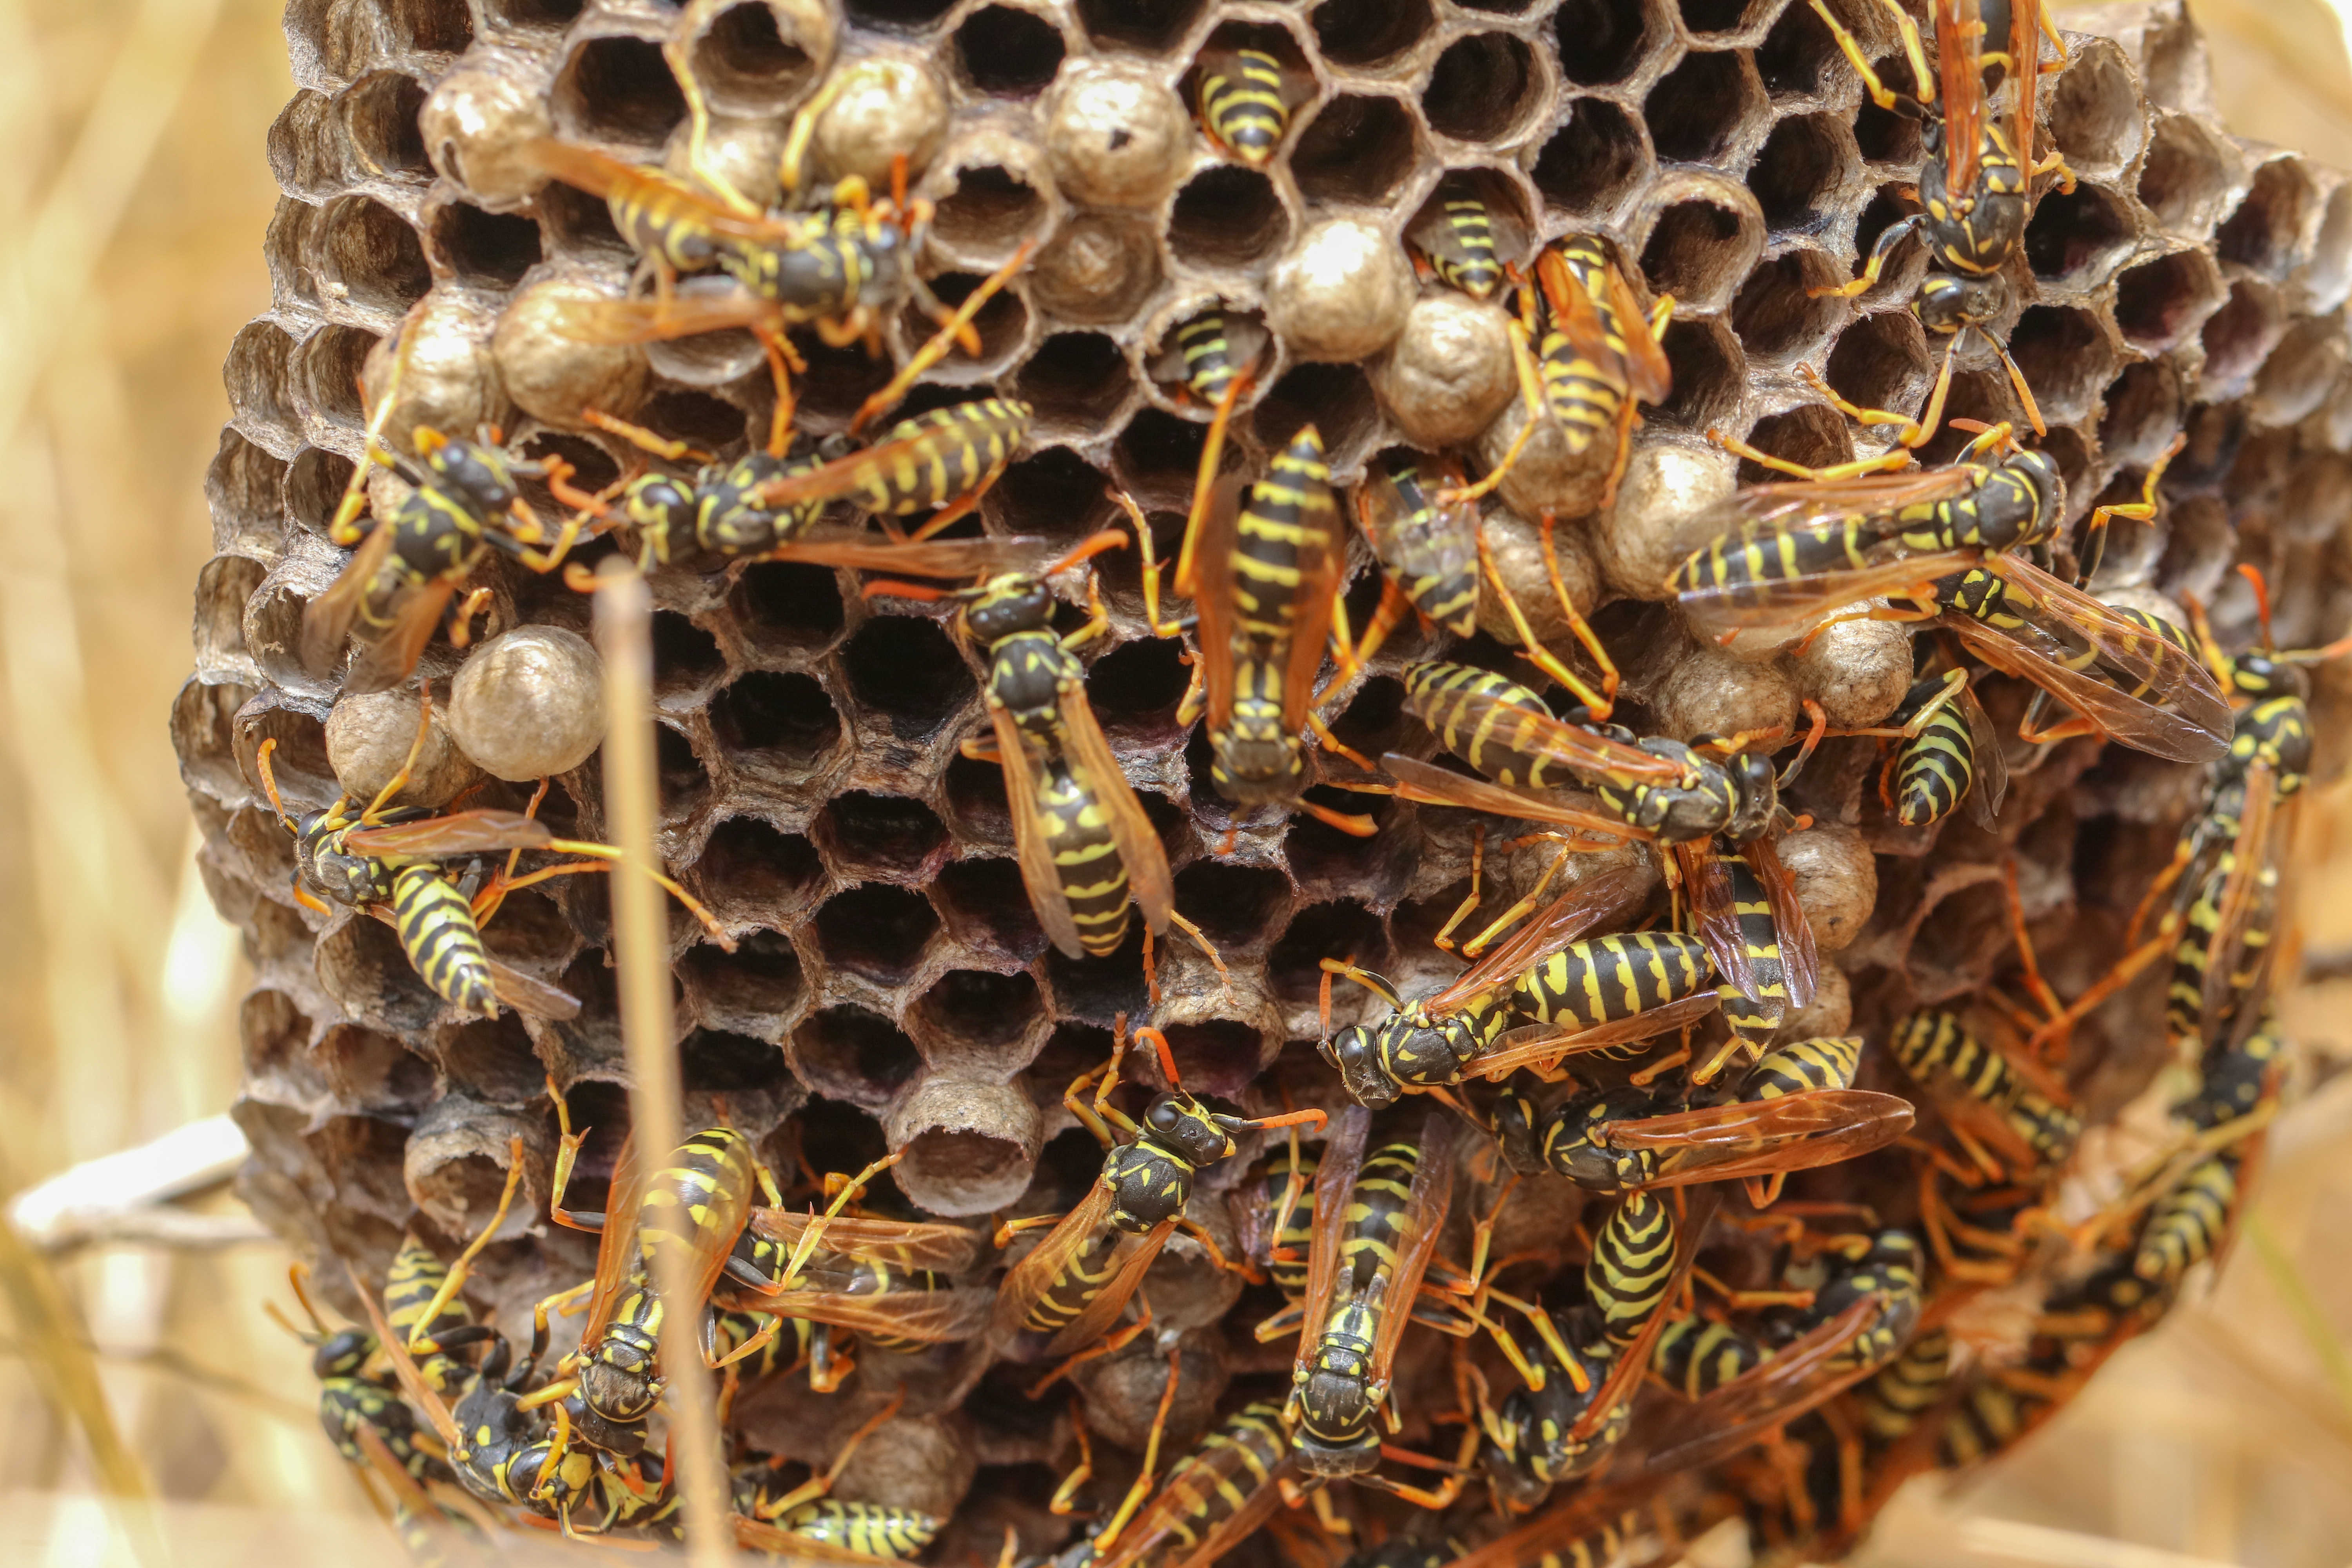 A hornets nests - learn how GGA Pest Management can help with our hornet pest control services.